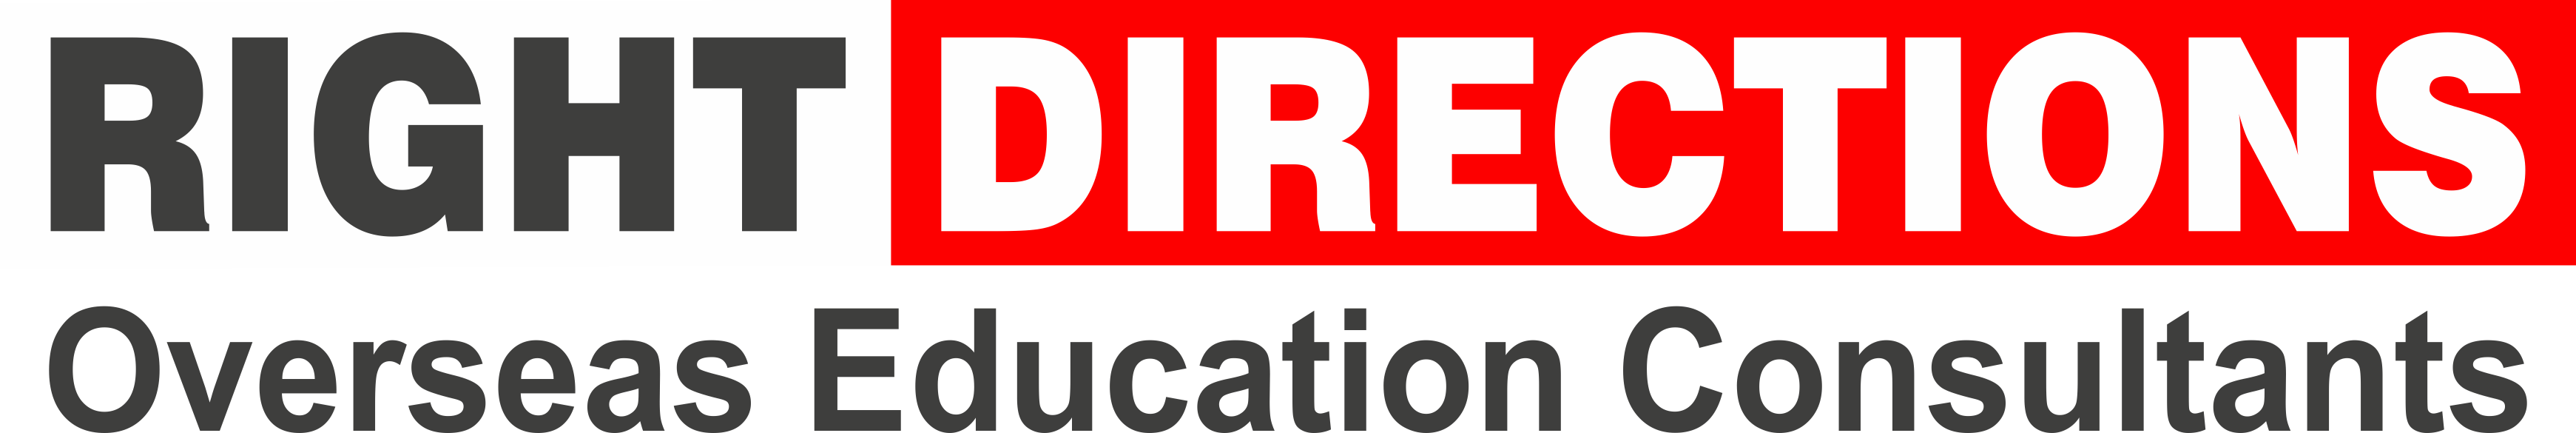 Right Directions Overseas|Coaching Institute|Education